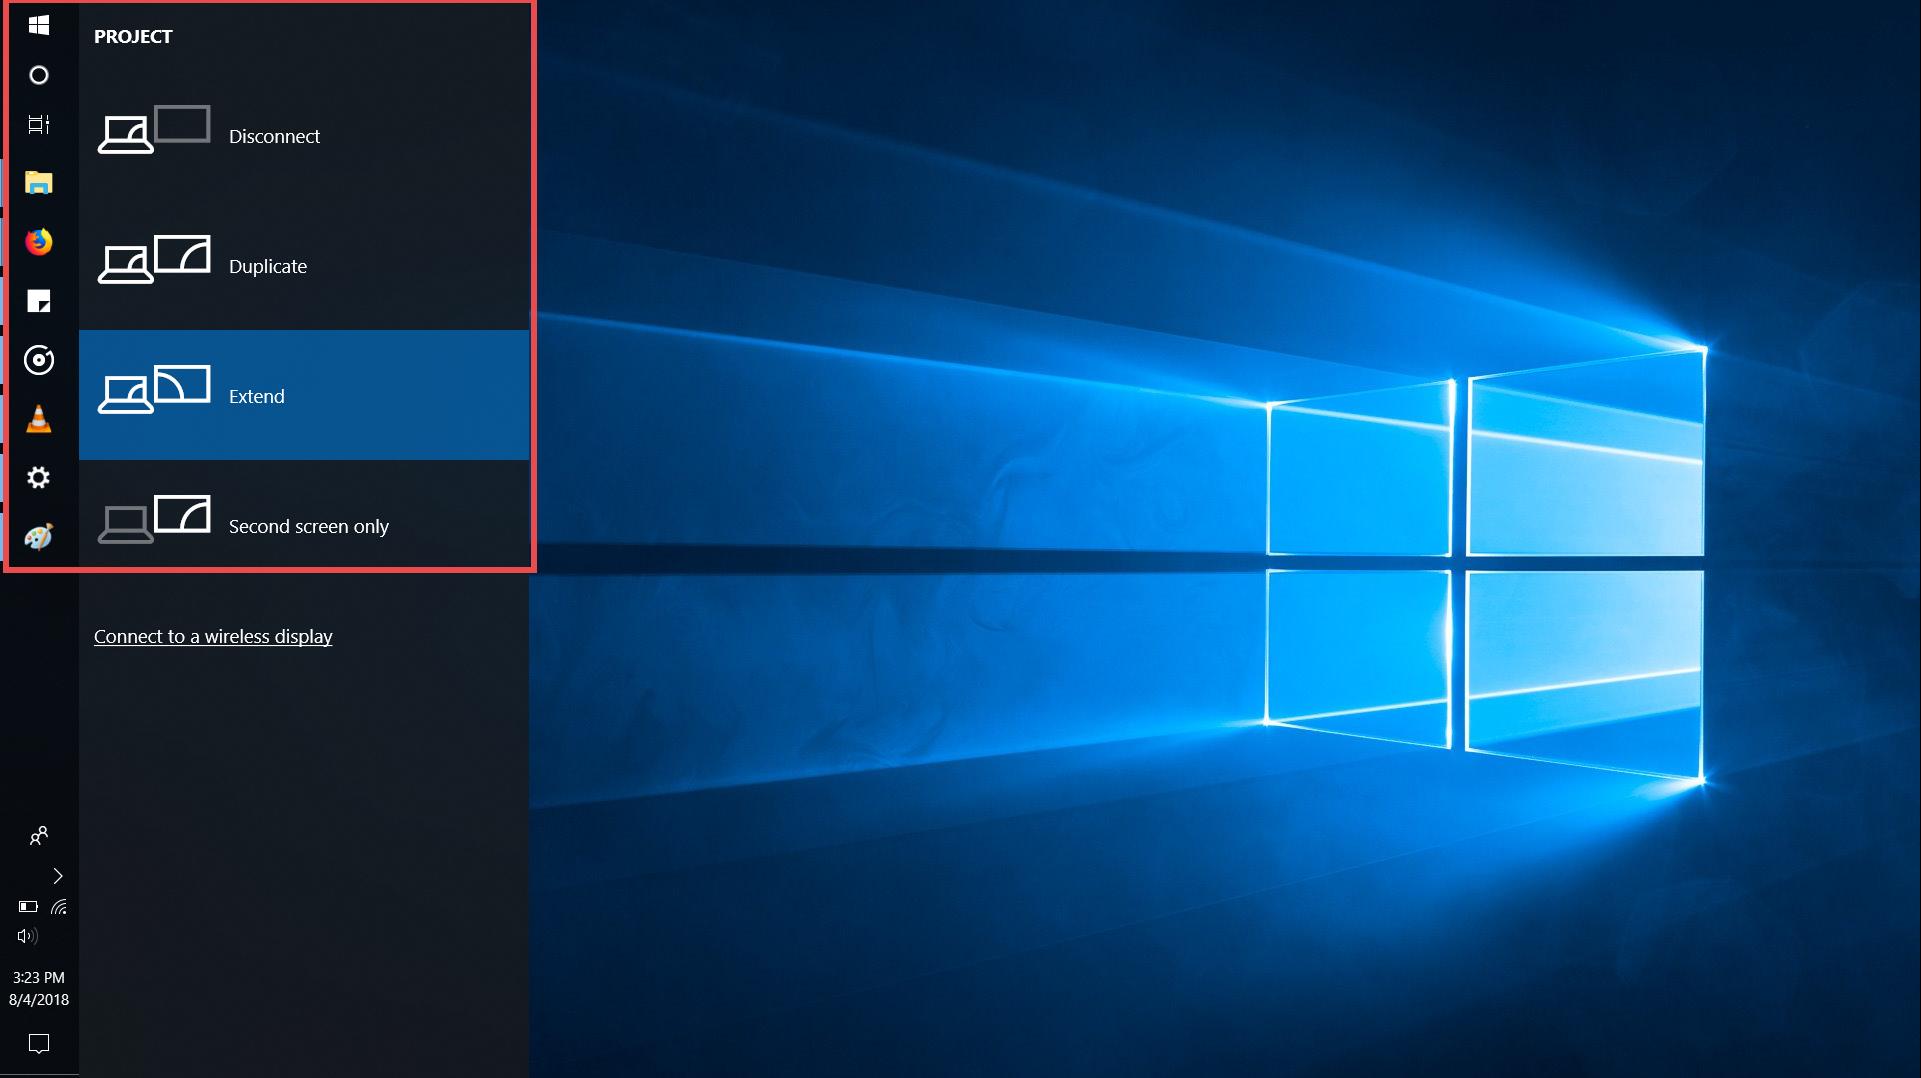 How to cast media from Windows 10 PC to your Smart TV - 60